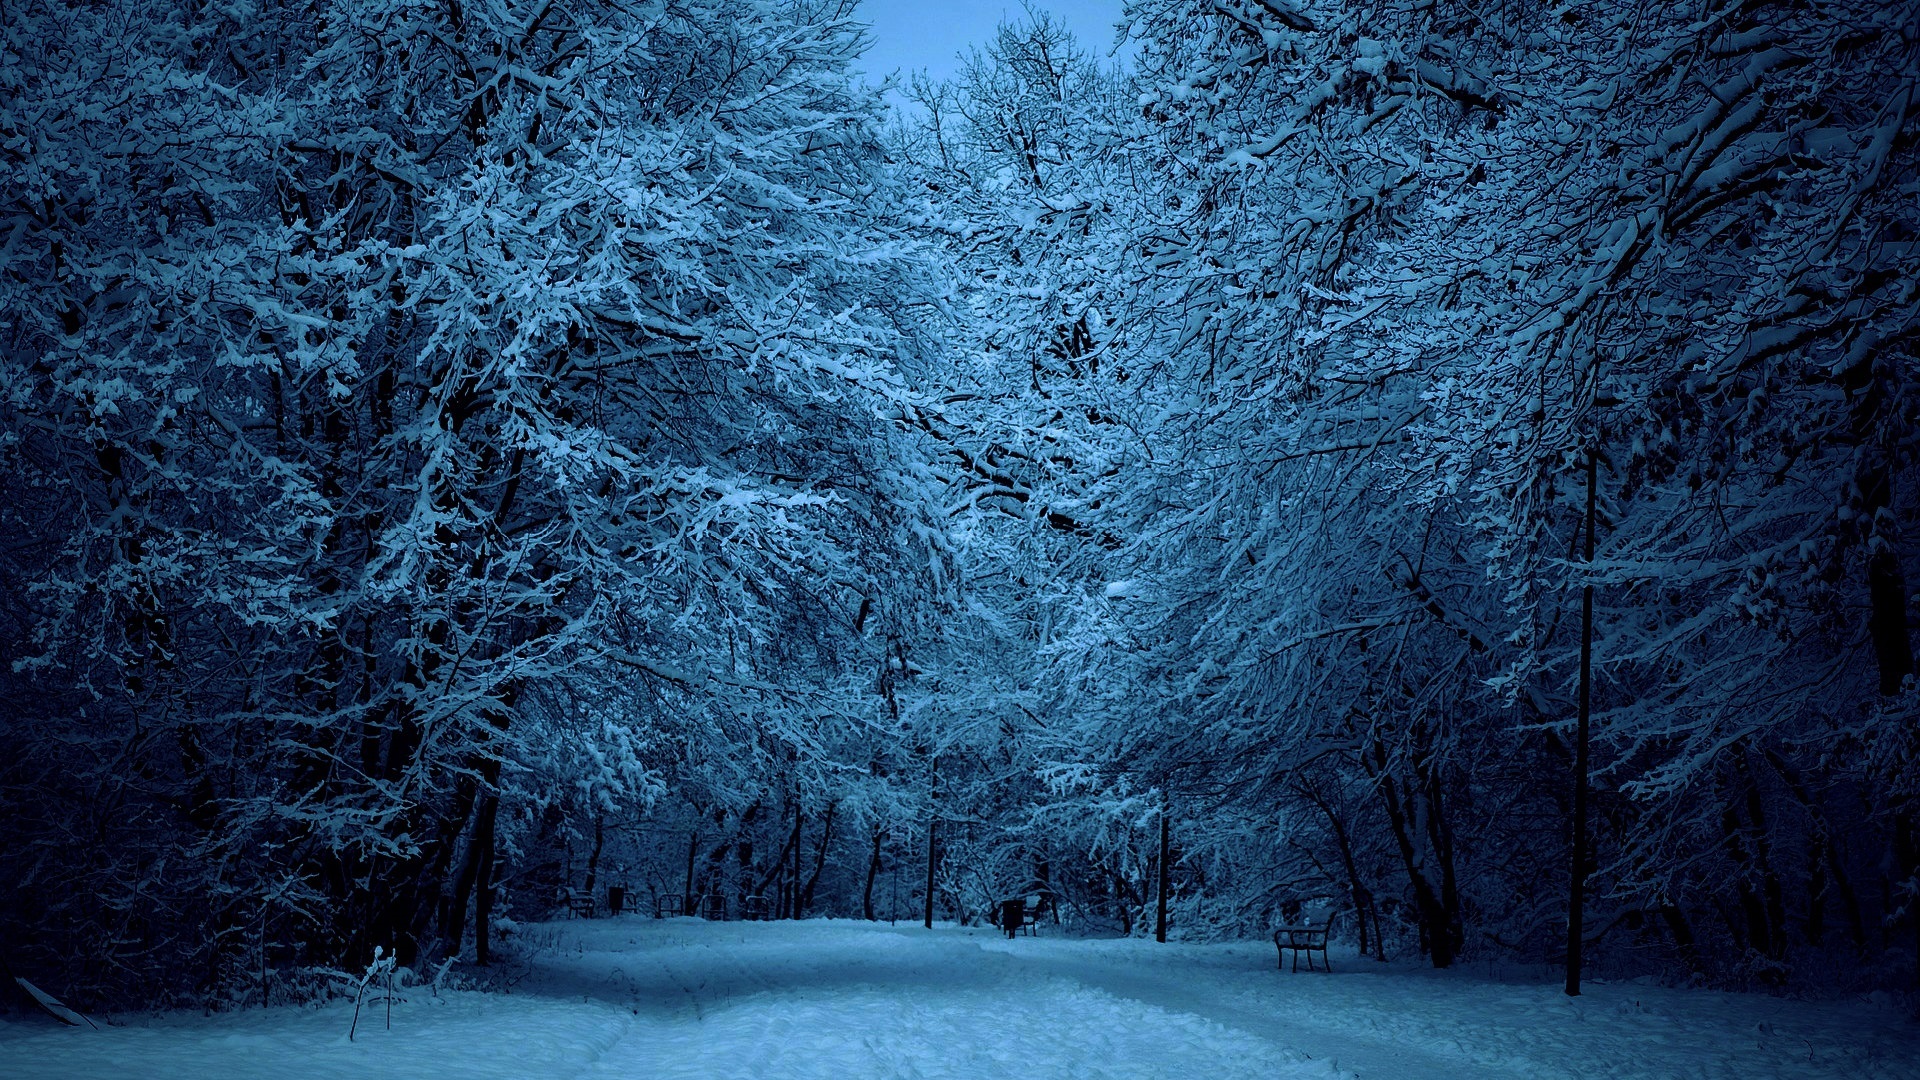 night, photography, winter, bench, blue, dusk, earth, forest, snow, tree Image for desktop